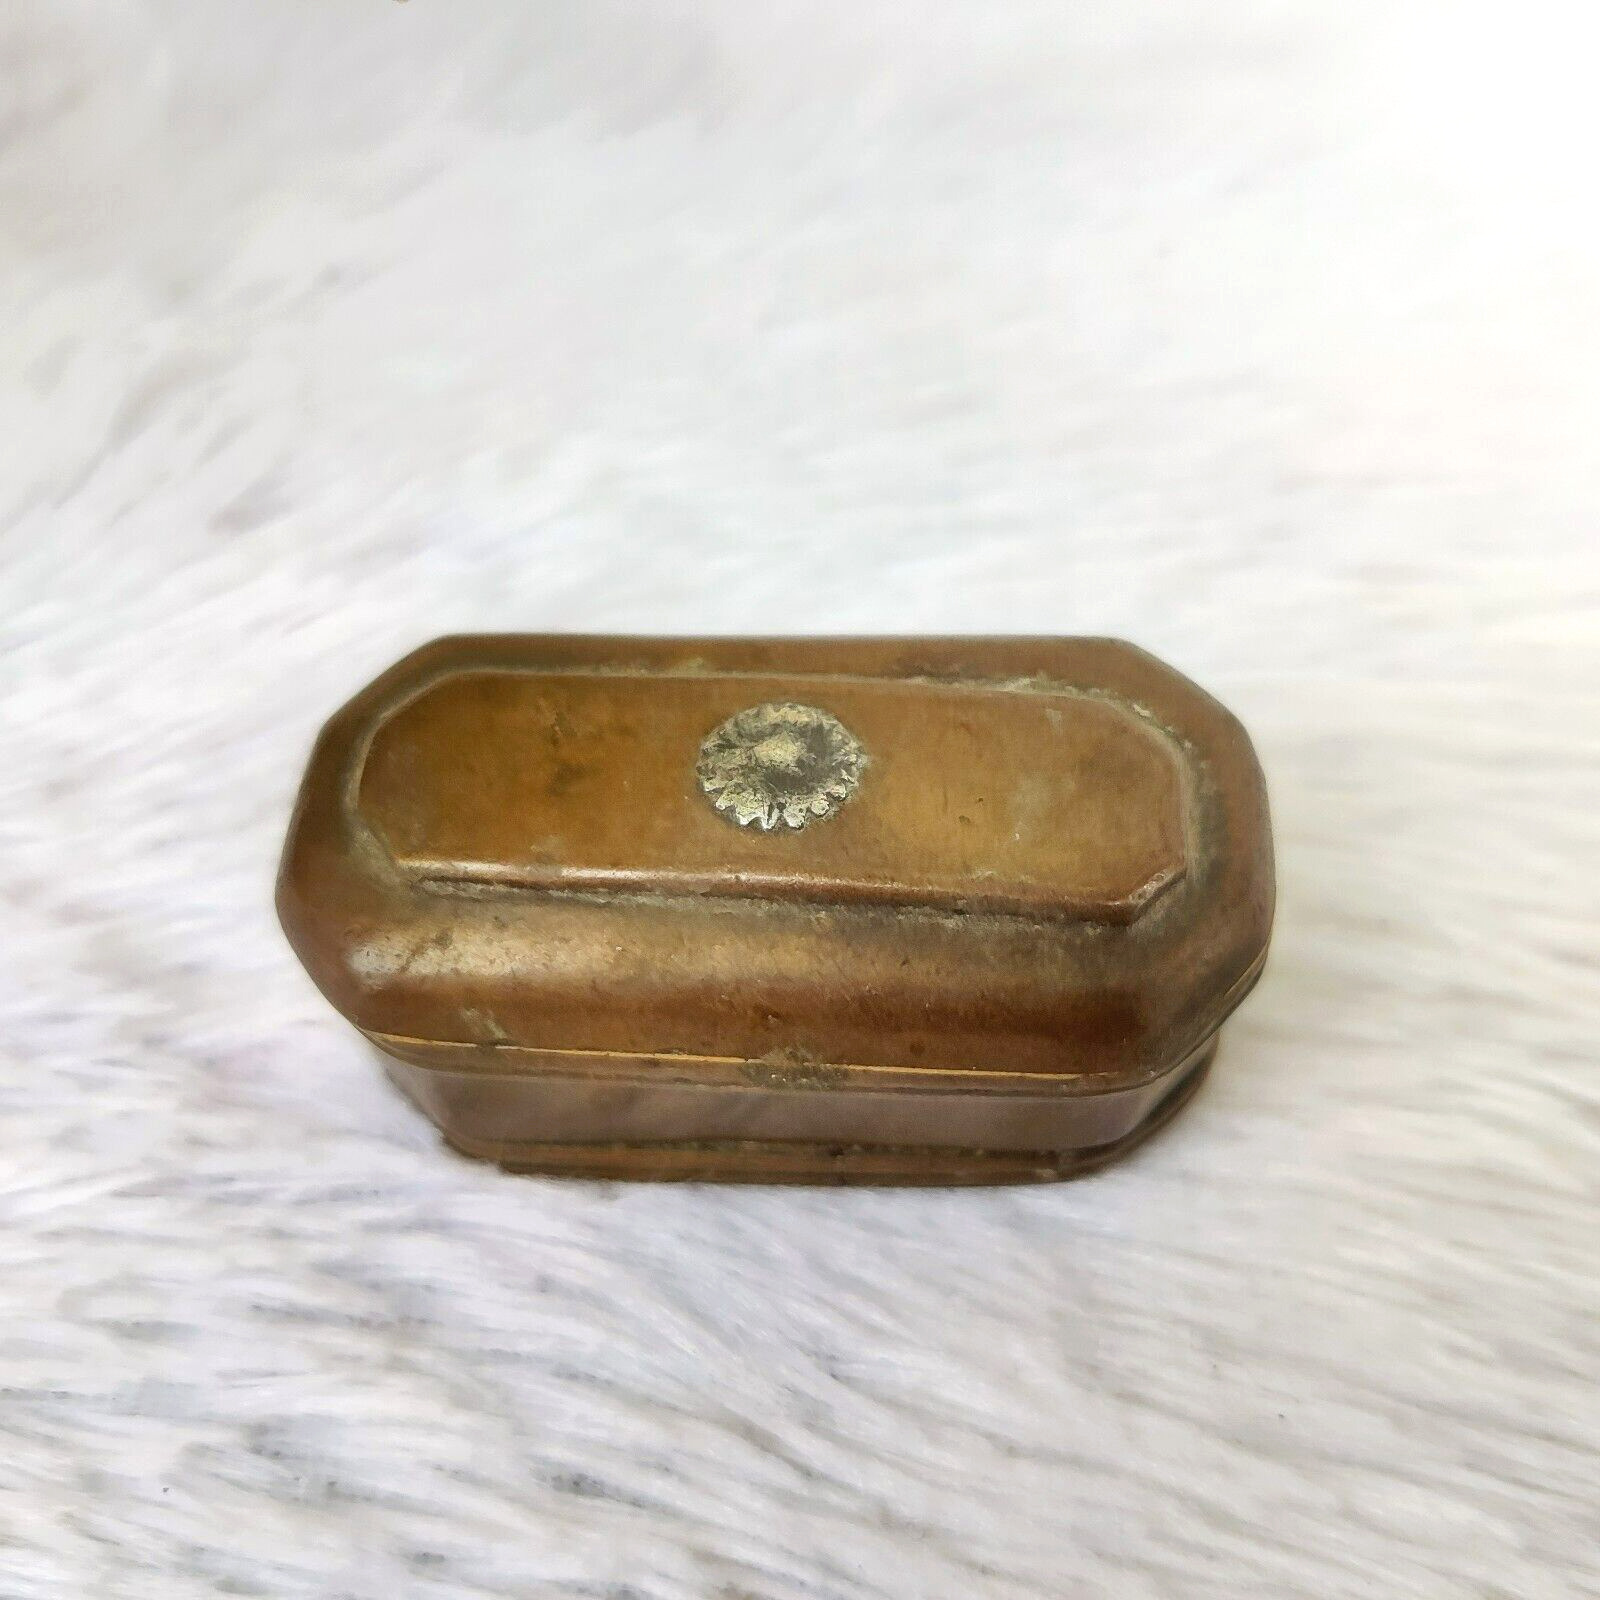 19c Vintage Brass Tricky Tobacco Box Silver Flower Decorated Rare Miniature Old